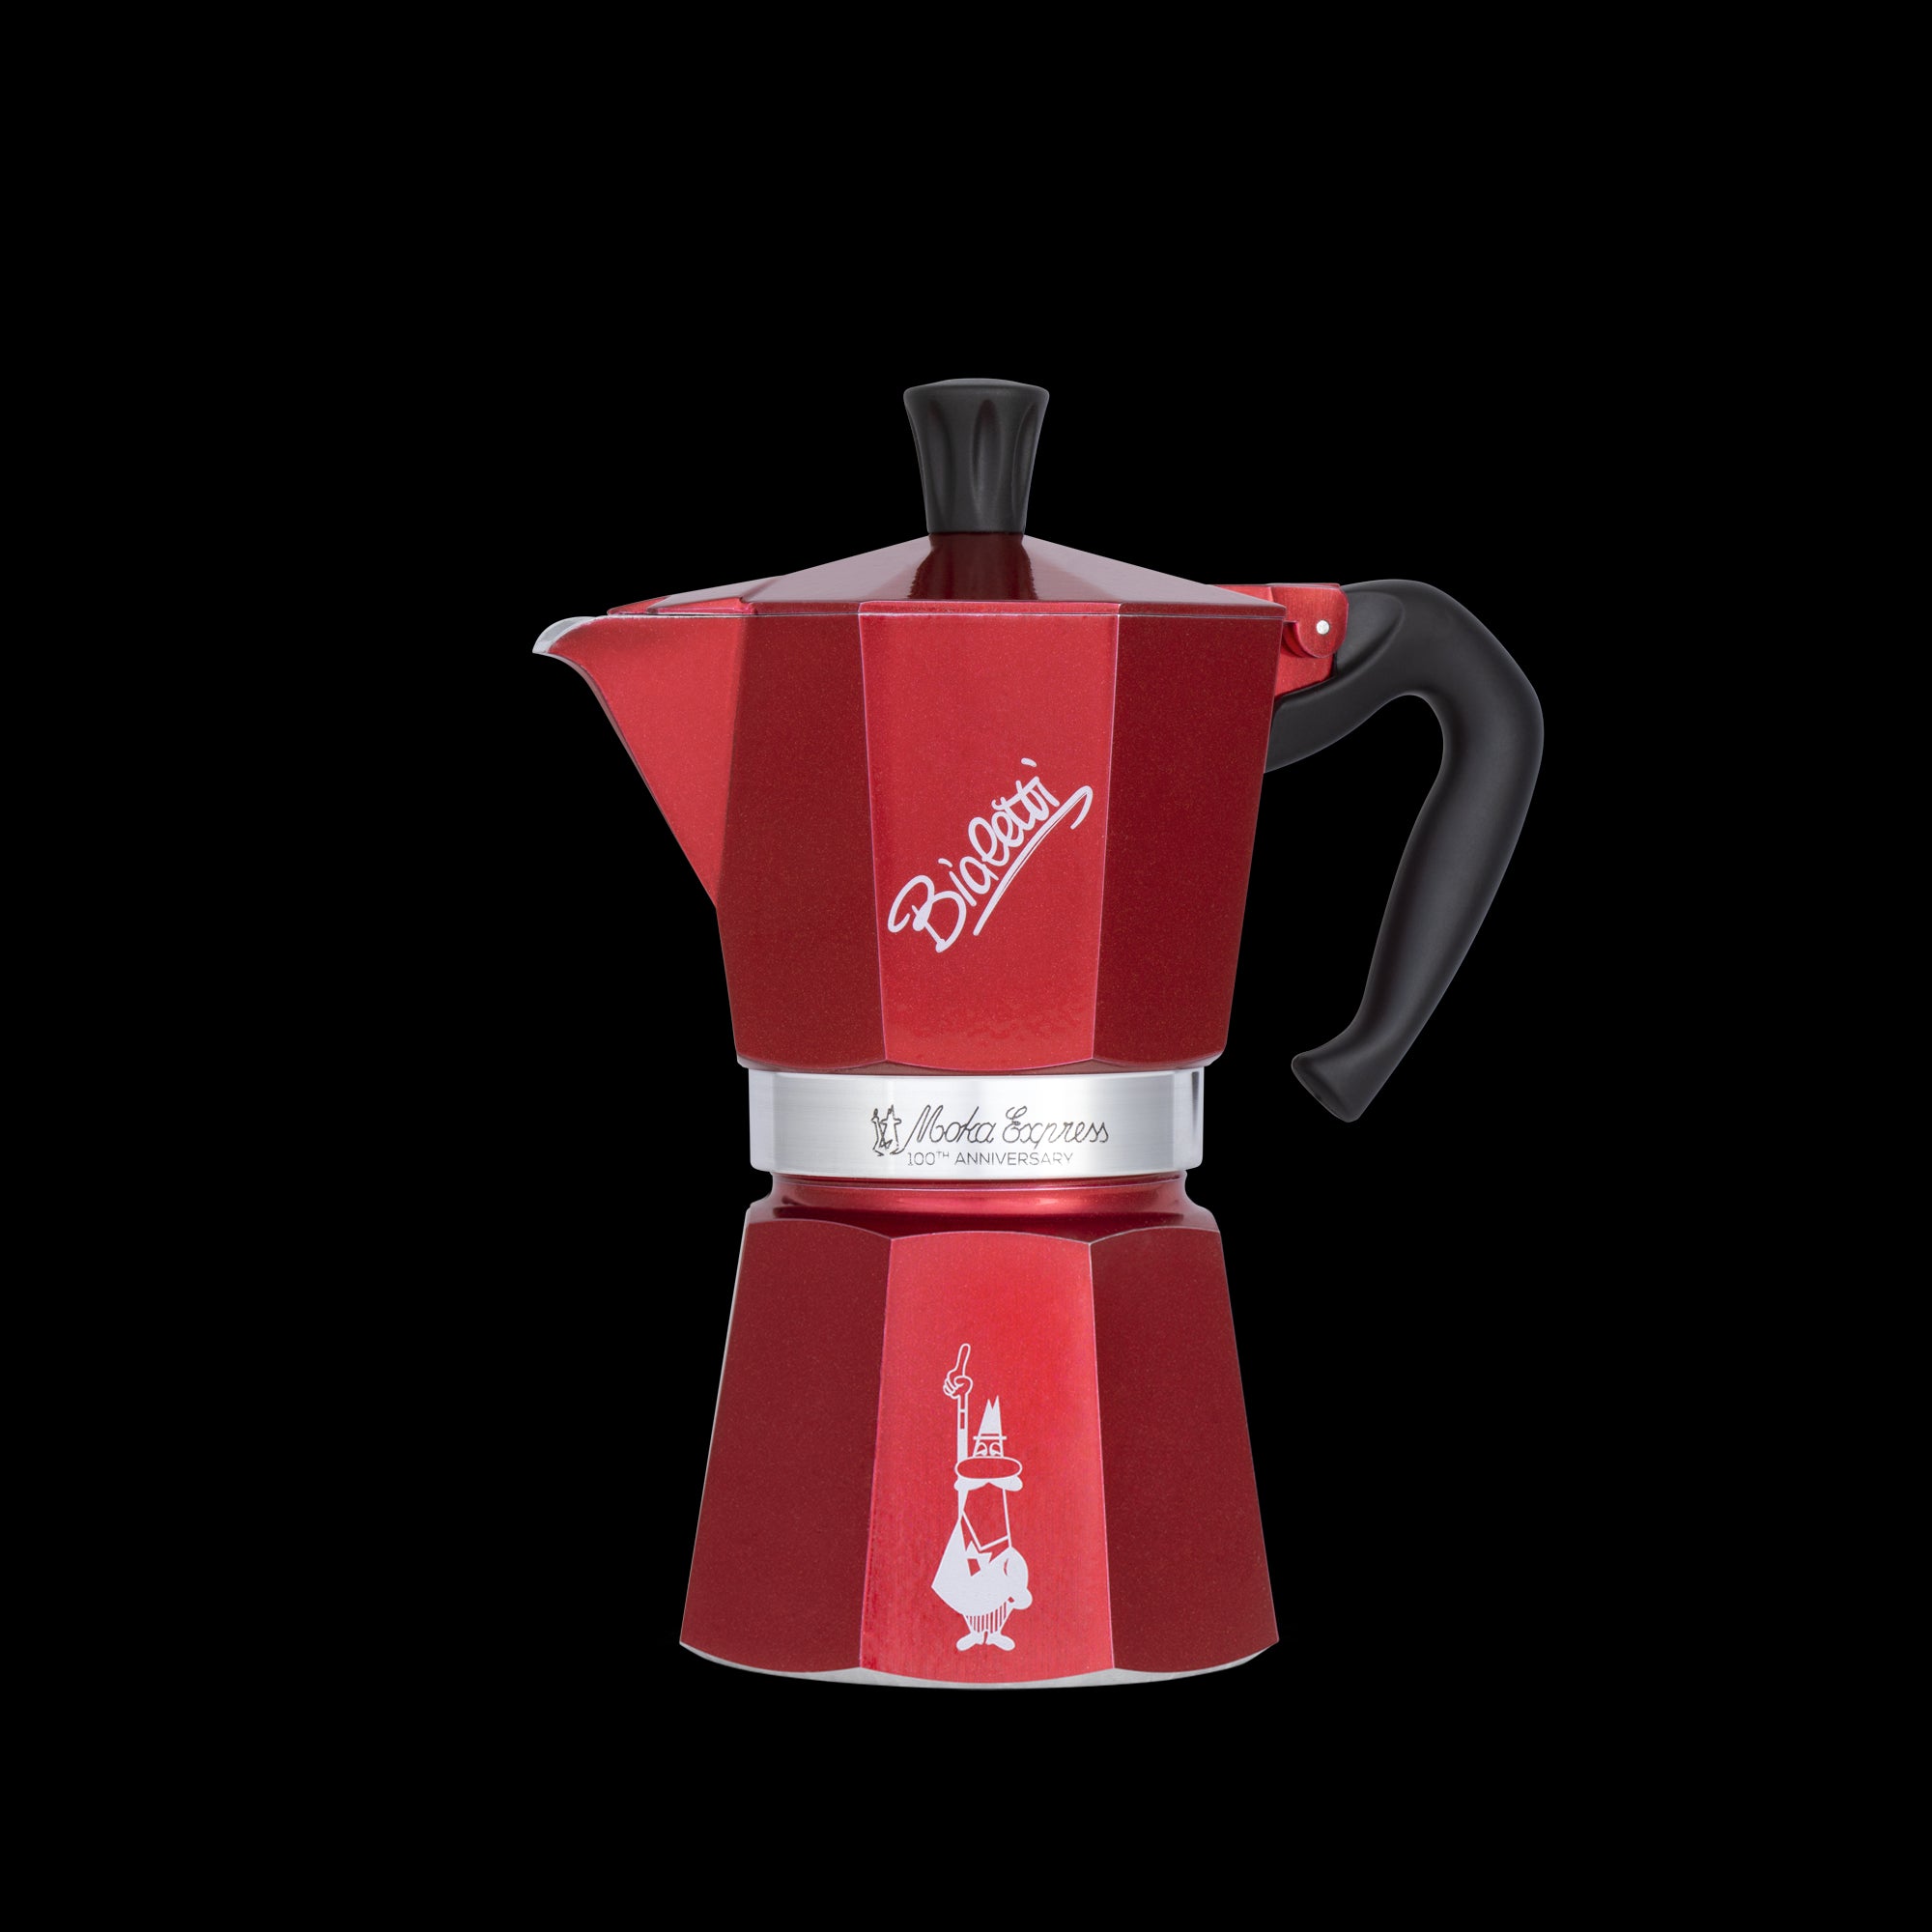 Induction coffee maker from Bialetti 6 cups 1683: achat en ligne